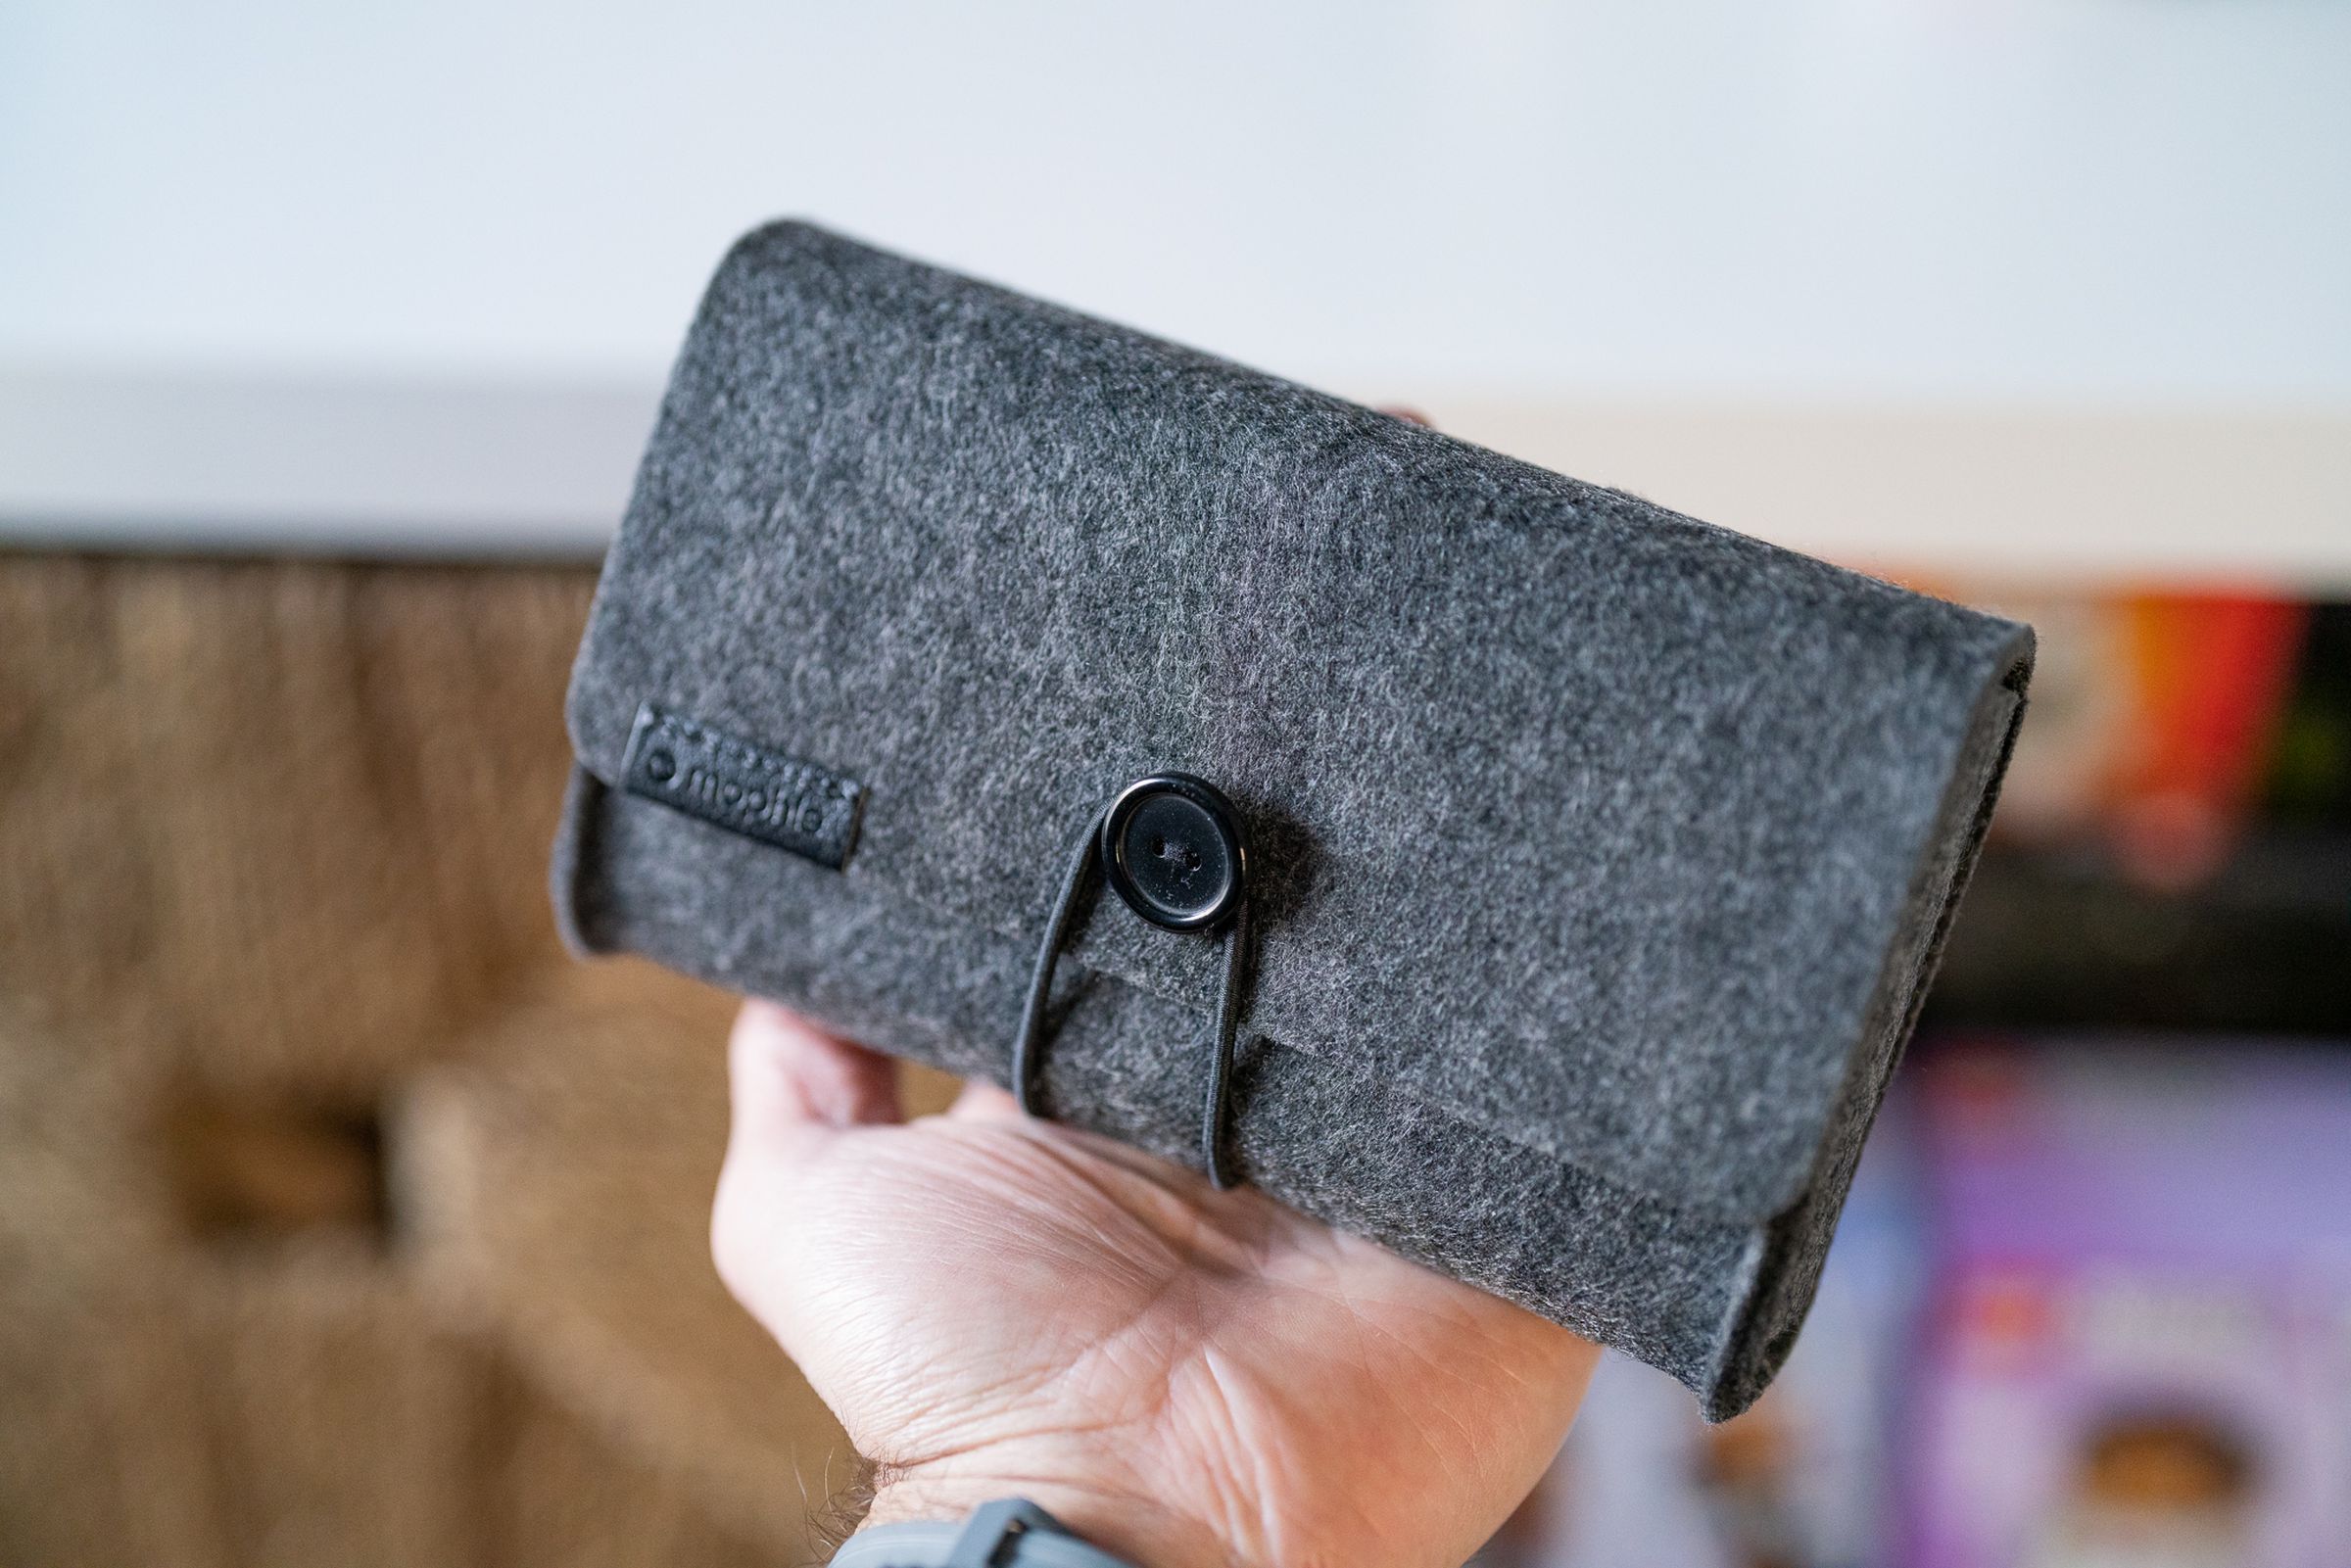 The fabric travel case Mophie includes is quite handsome and handy.